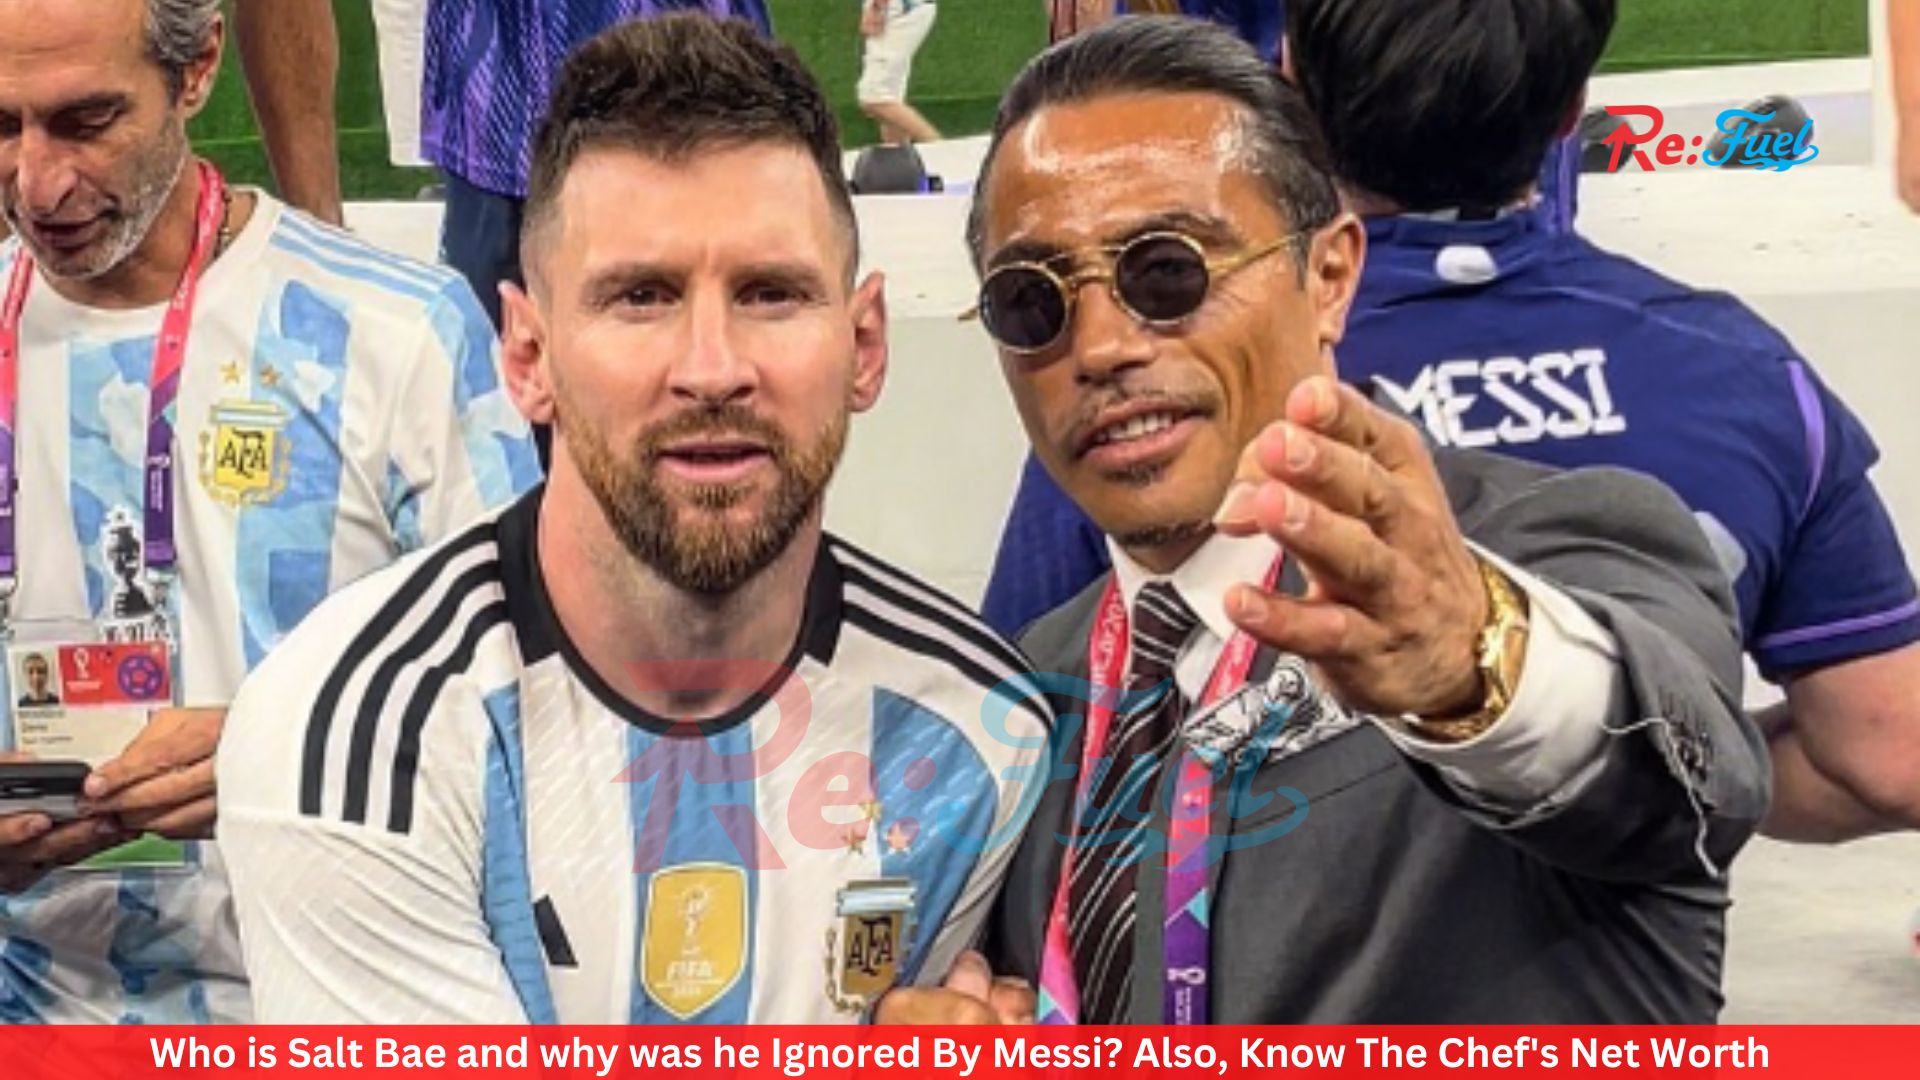 Who is Salt Bae and why was he Ignored By Messi? Also, Know The Chef's Net Worth